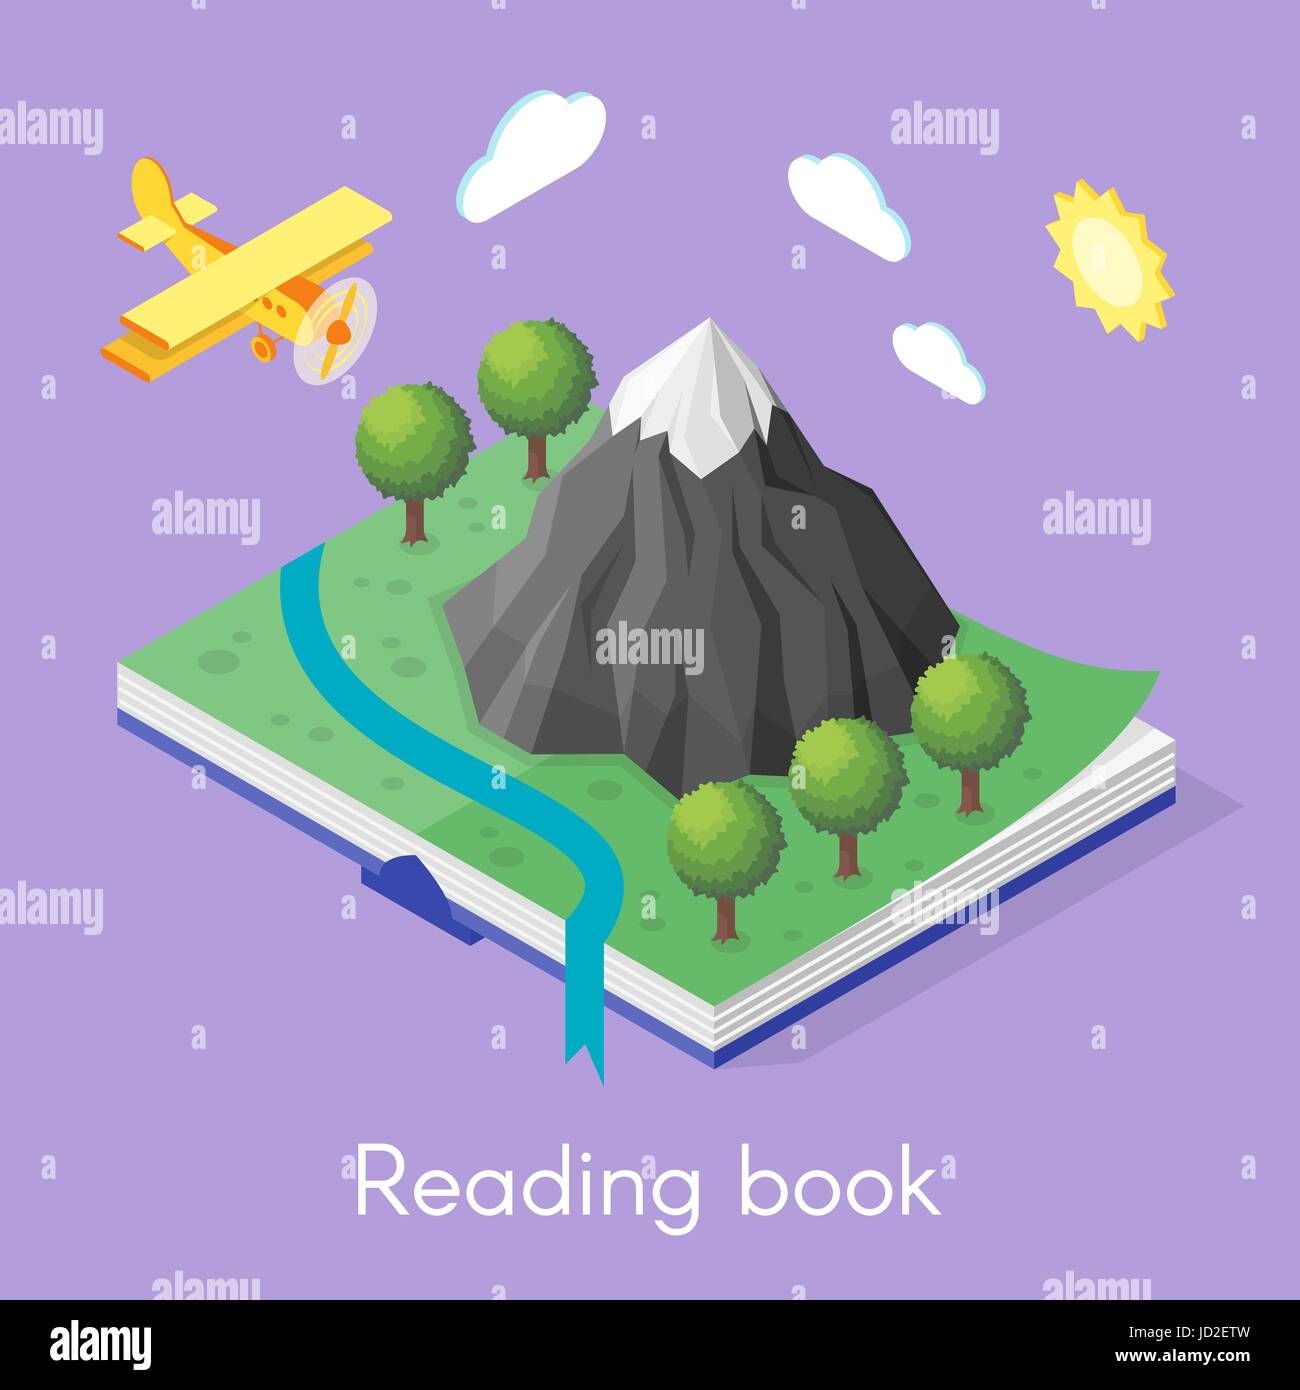 Vector isometric concept for reading book. Open book with mountain and trees. Plane flying in the sky. Stock Vector